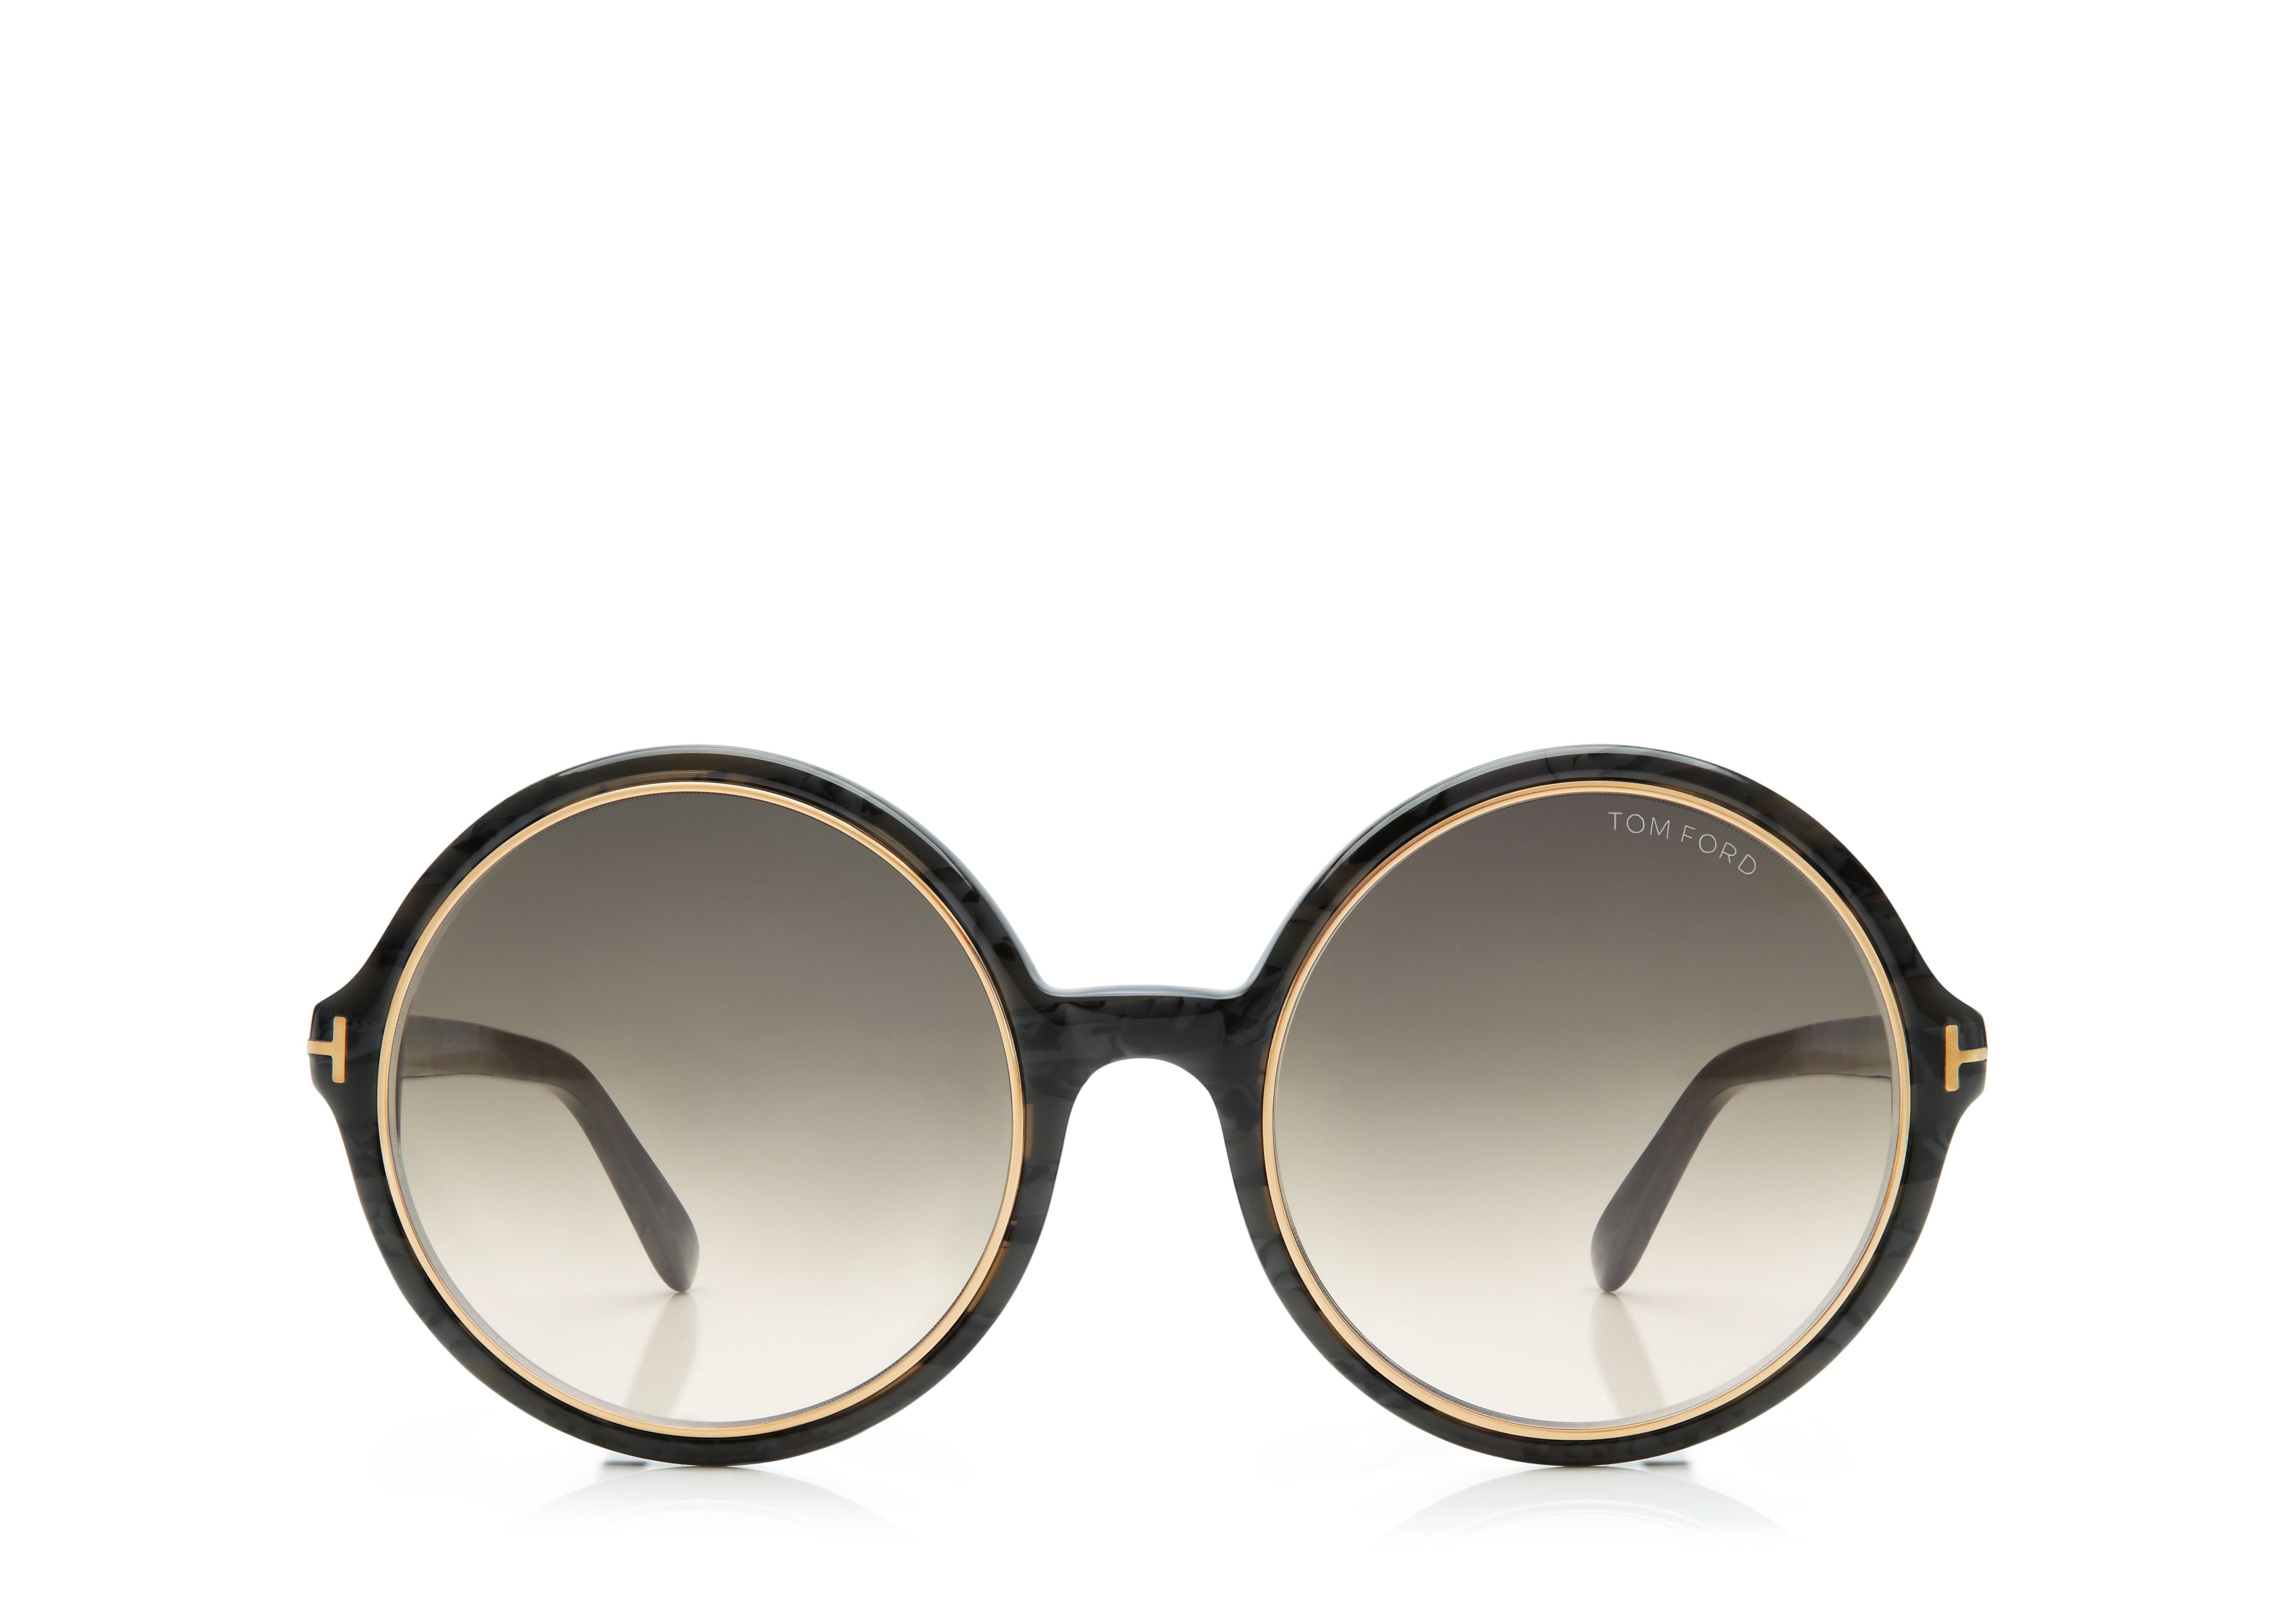 Tom ford carrie glasses #6